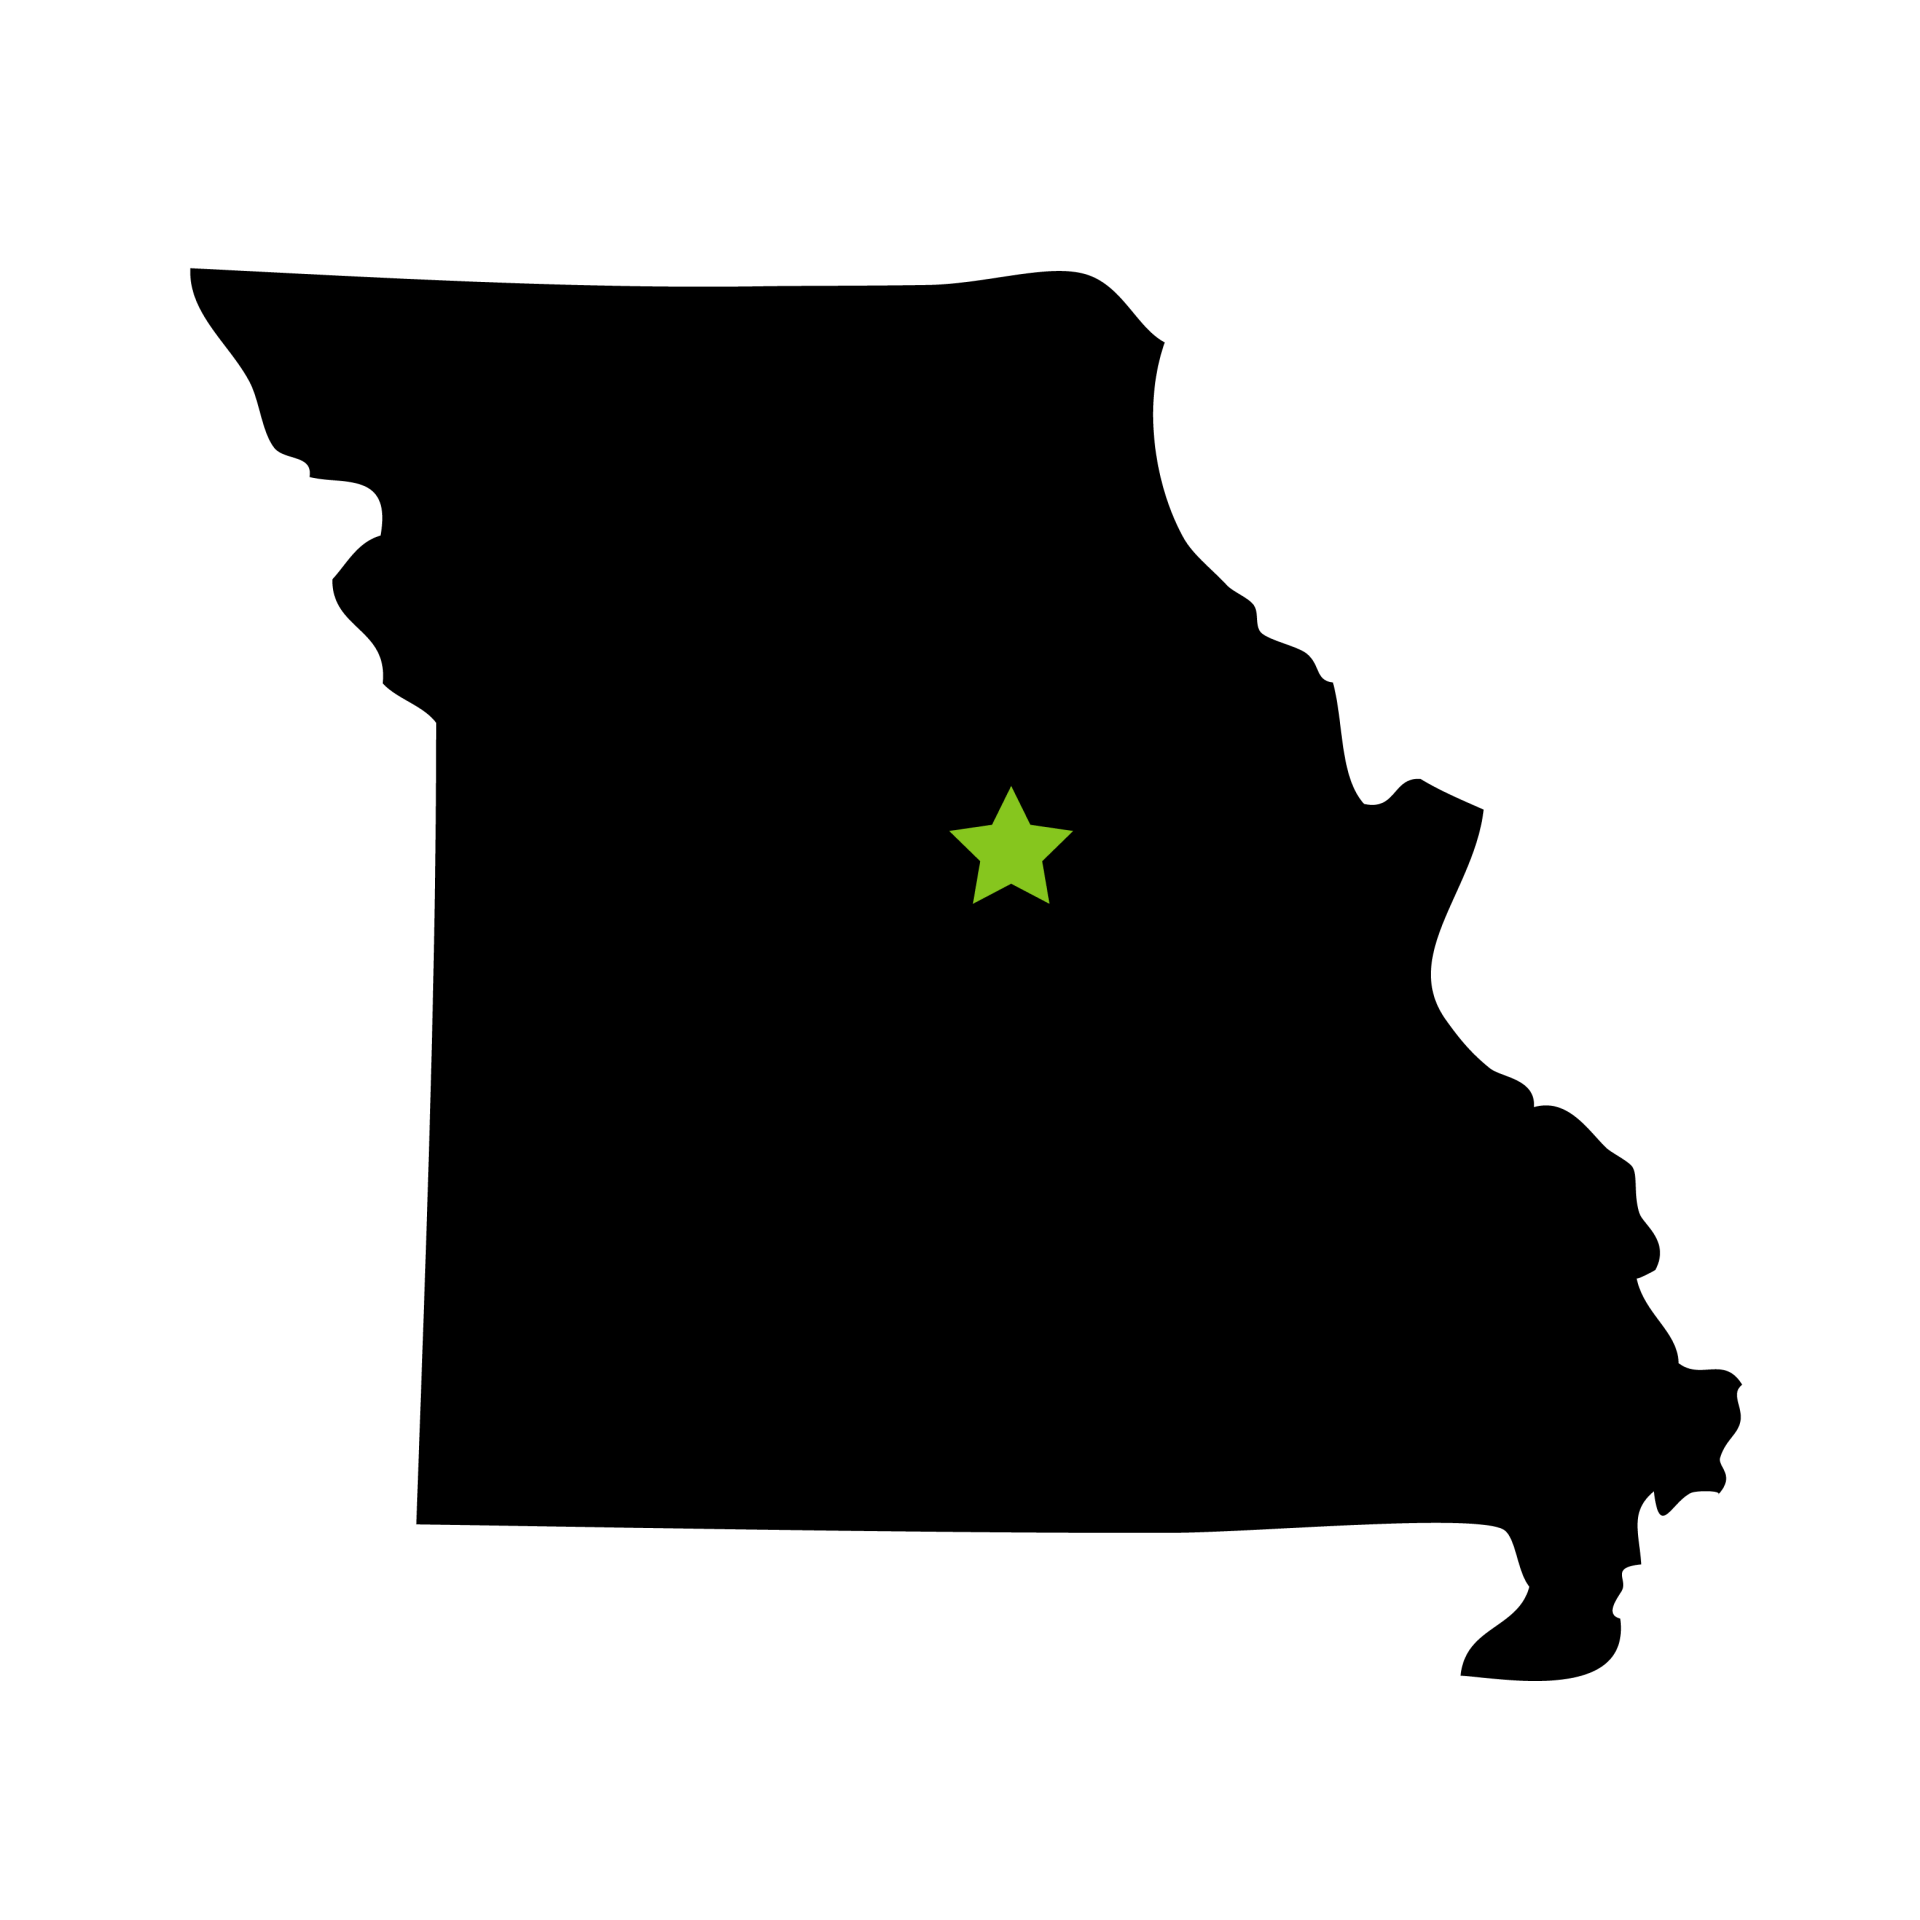 Find Lindner Properties on the Mid-Missouri Map for Commercial Real Estate